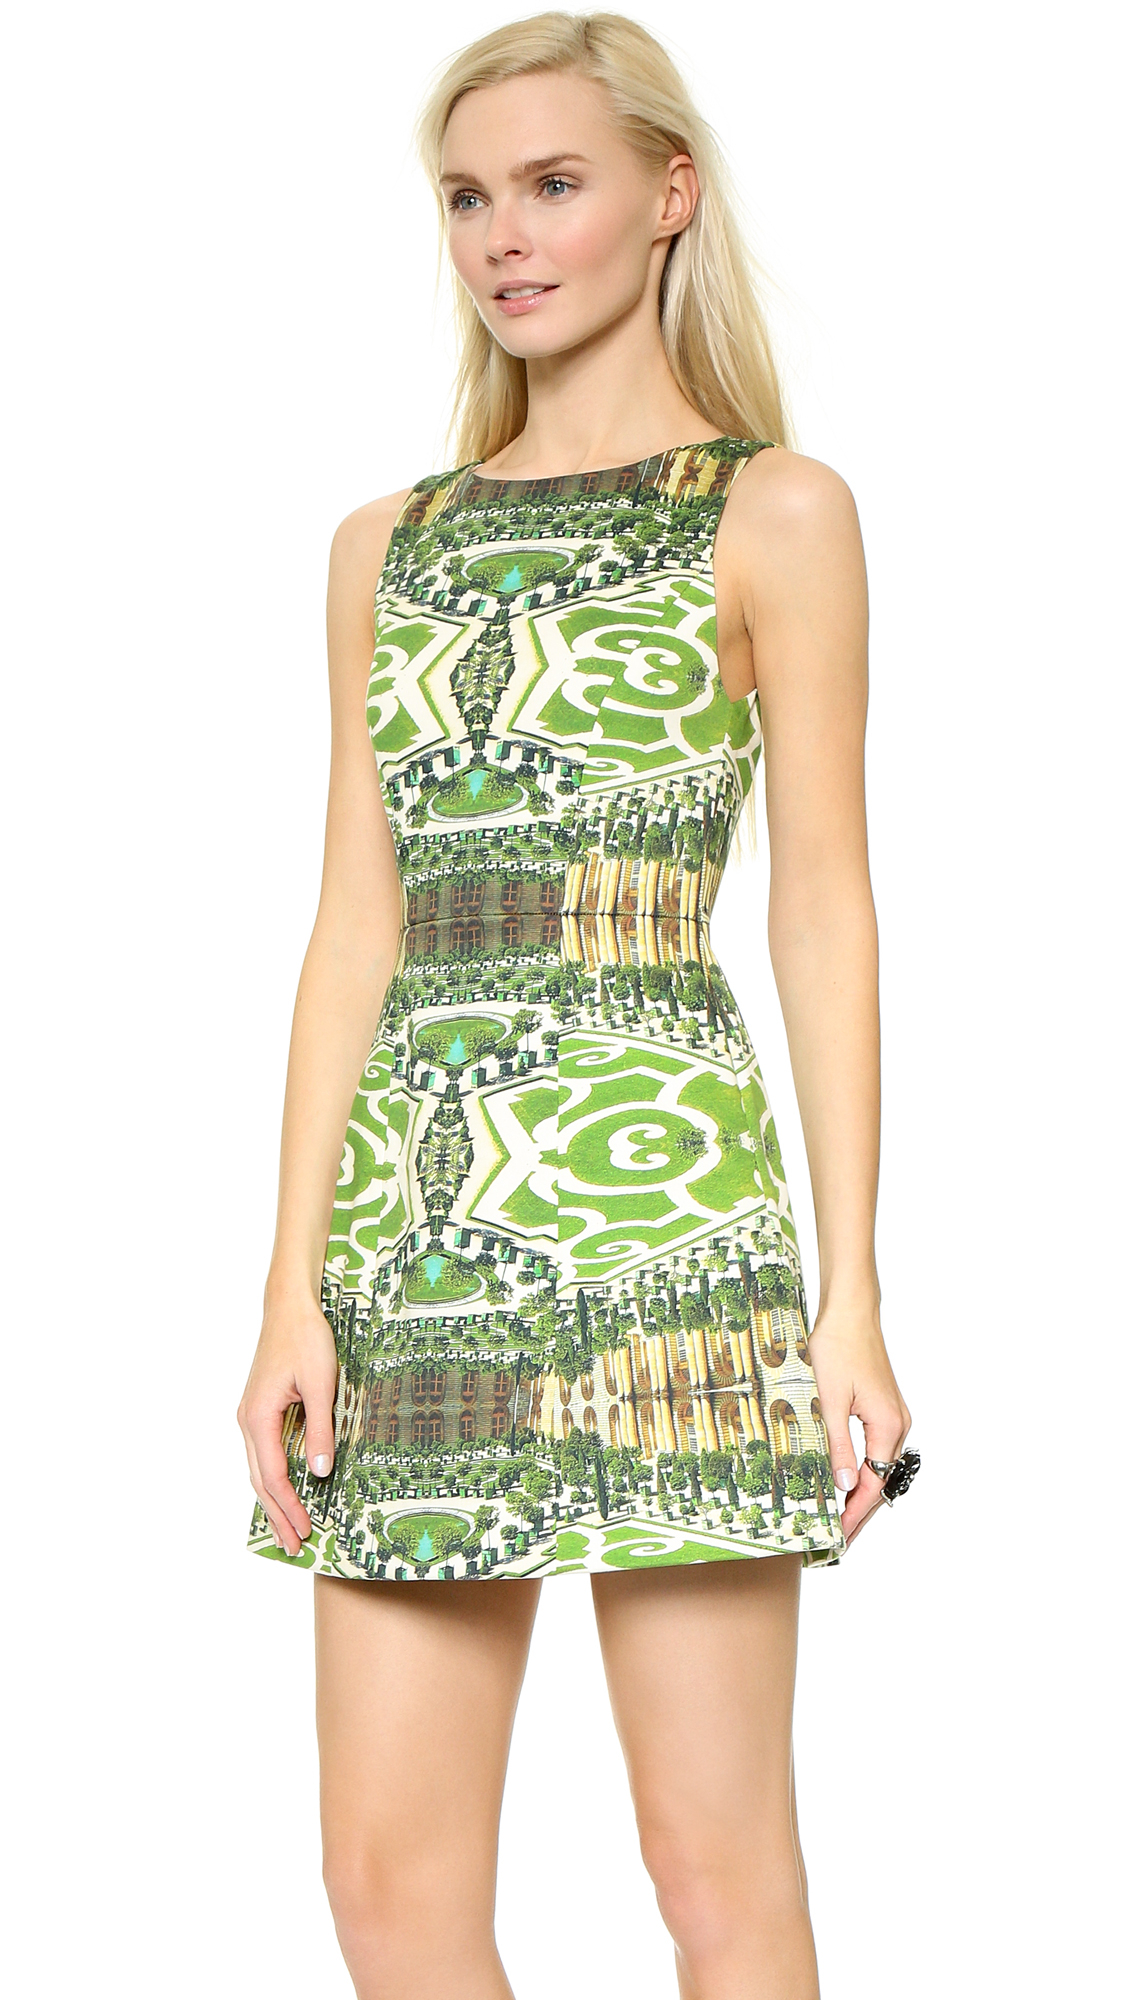 Alice + olivia Carrie Boatneck Structured Dress - Mirrored Garden in ...